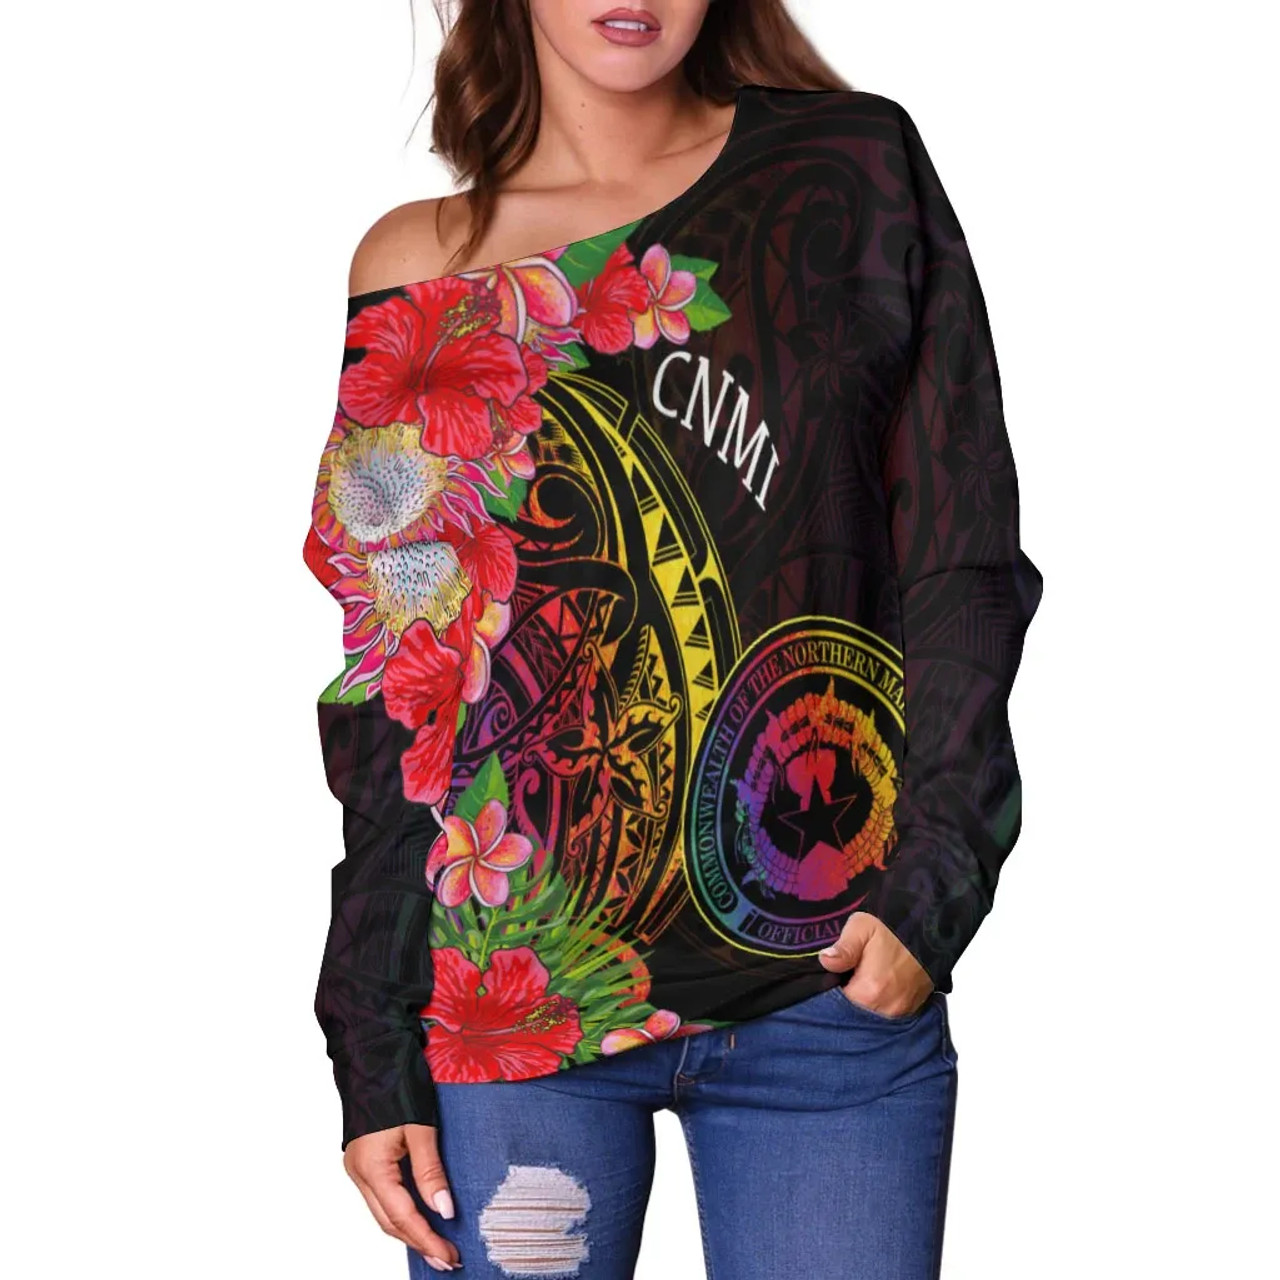 Northern Mariana Islands Women Off Shoulder Sweater - Tropical Hippie Style 2